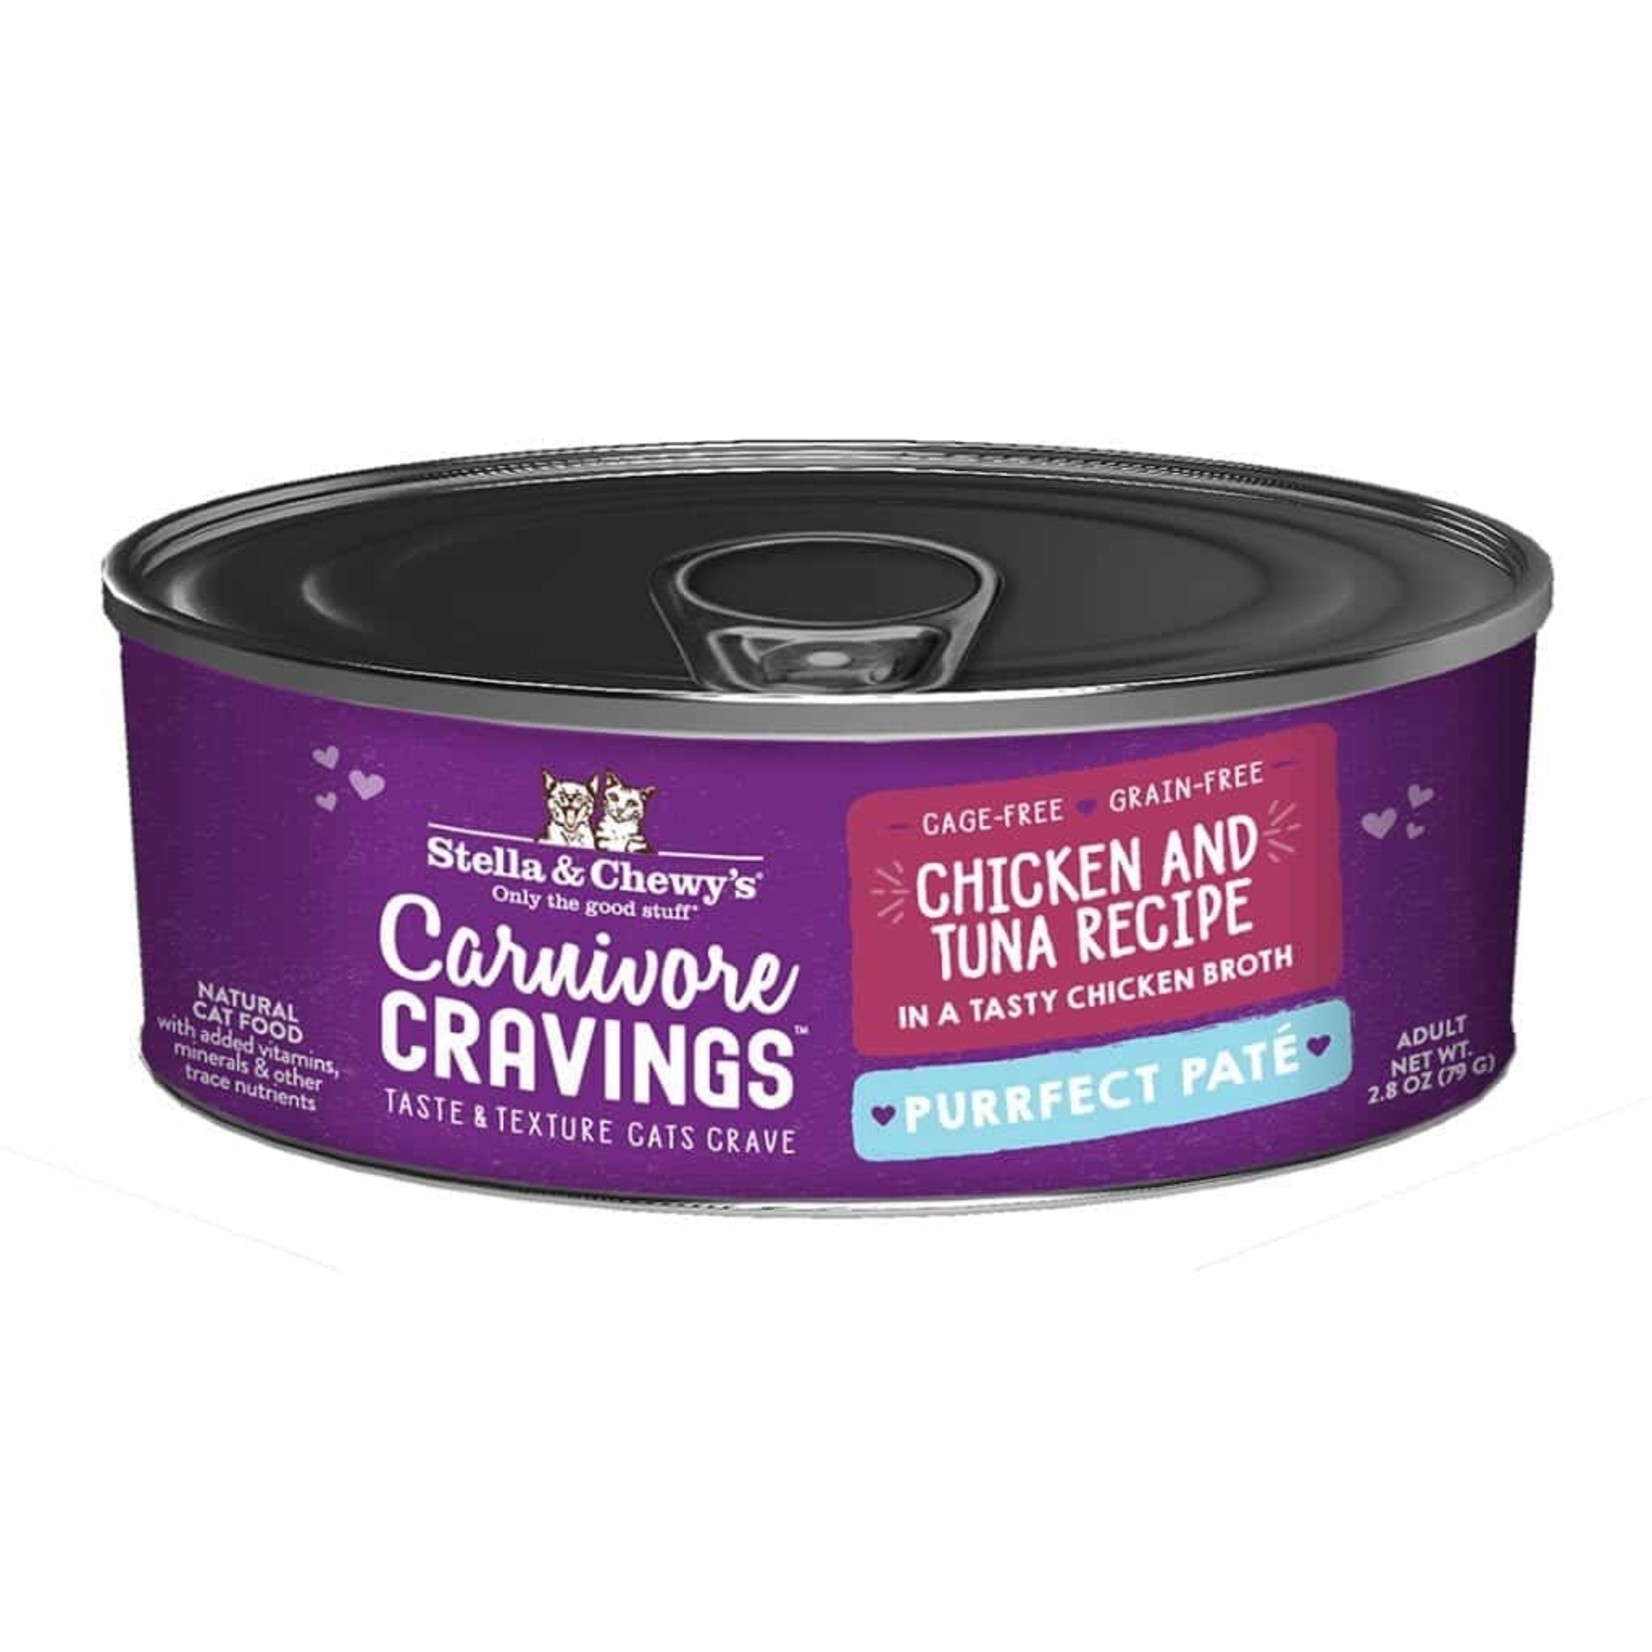 Stella and Chewys Stella & Chewy's Wet Cat Food Carnivore Cravings Purrfect Pate Chicken and Tuna Recipe 2.8oz Can Grain Free